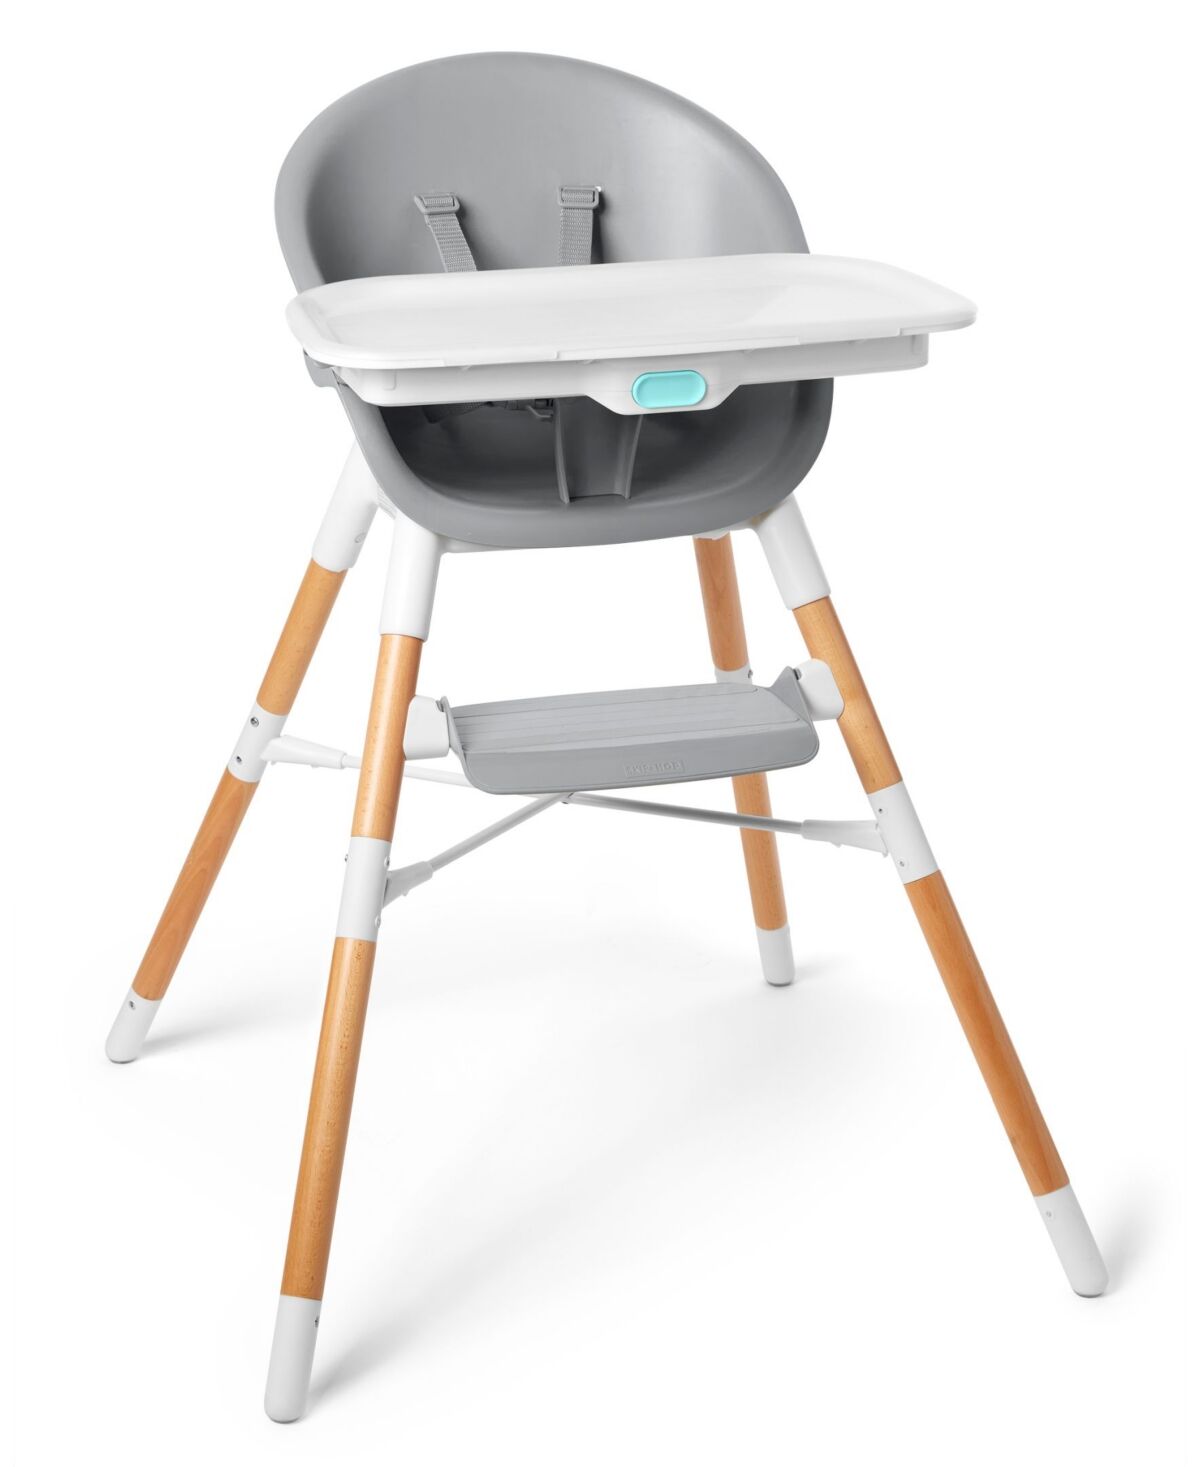 Skip Hop Baby 4 in 1 High Chair - Gray